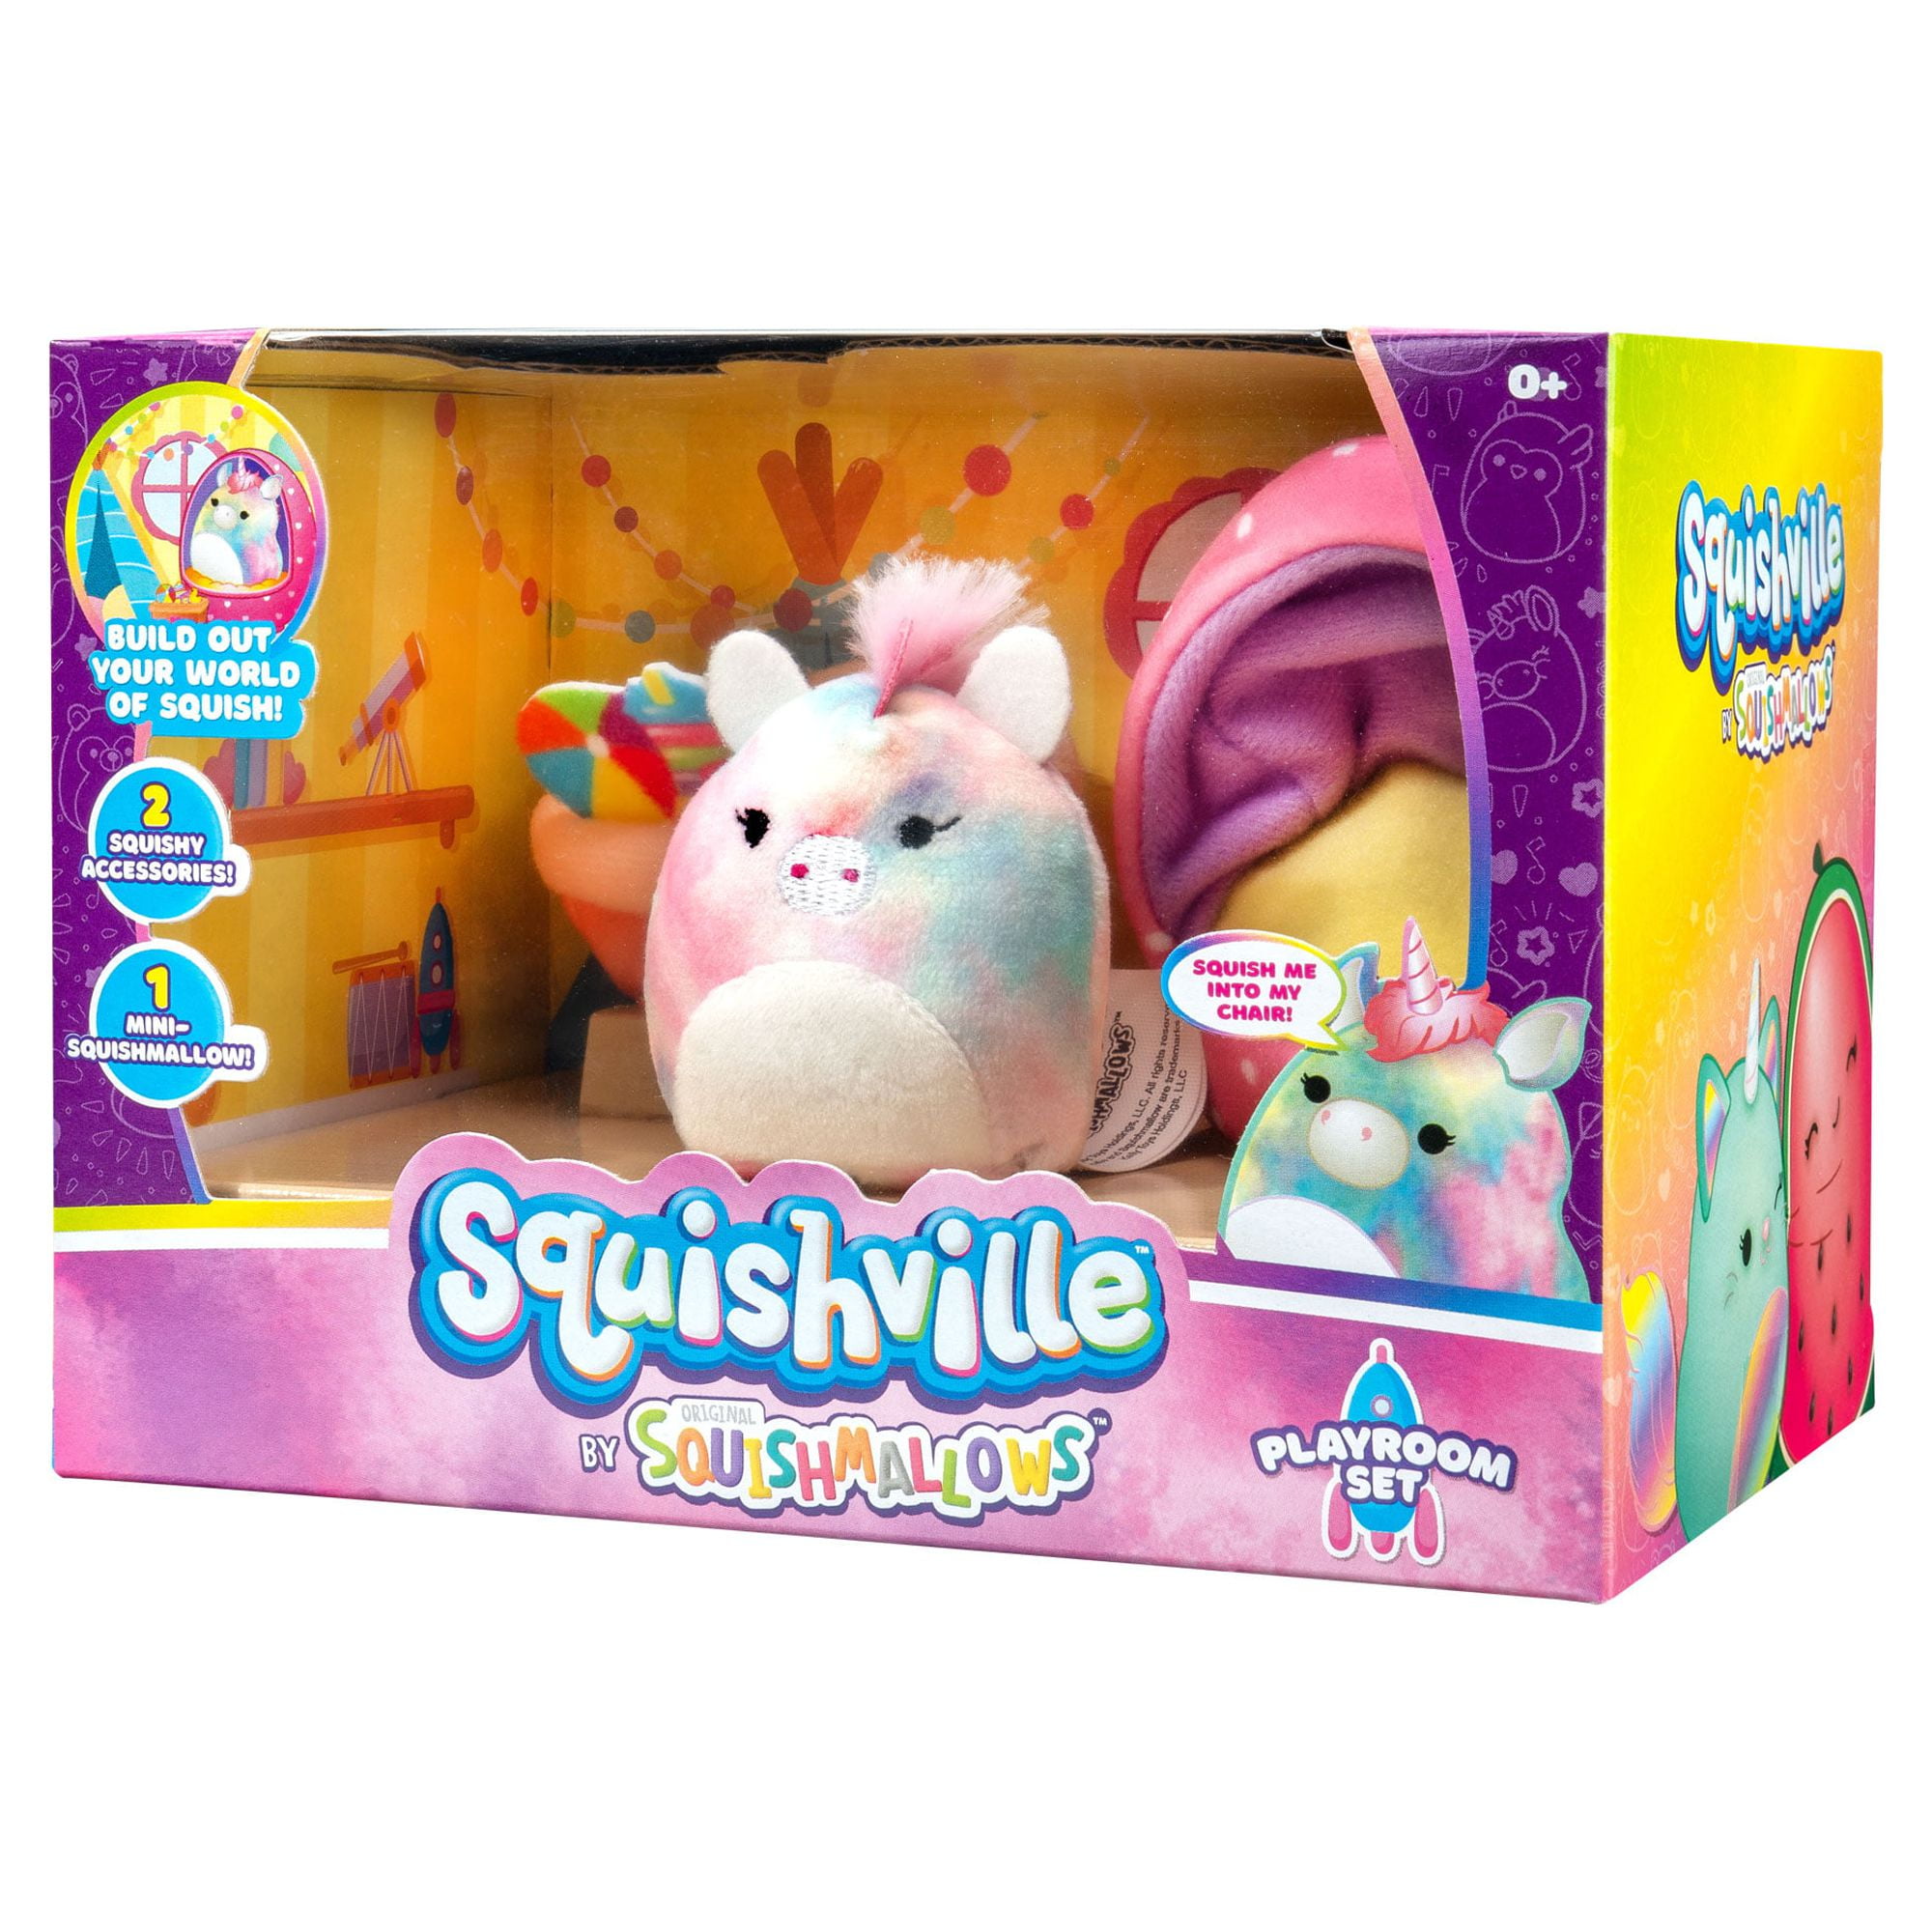  Squishville Squishmallows Mall-Two 2-Inch Mini Plush  Characters,Themed Play Scene,4 Accessories (Shopping Bag/Cart,Cash  Register,Arcade Machine)- Exclusive : Toys & Games